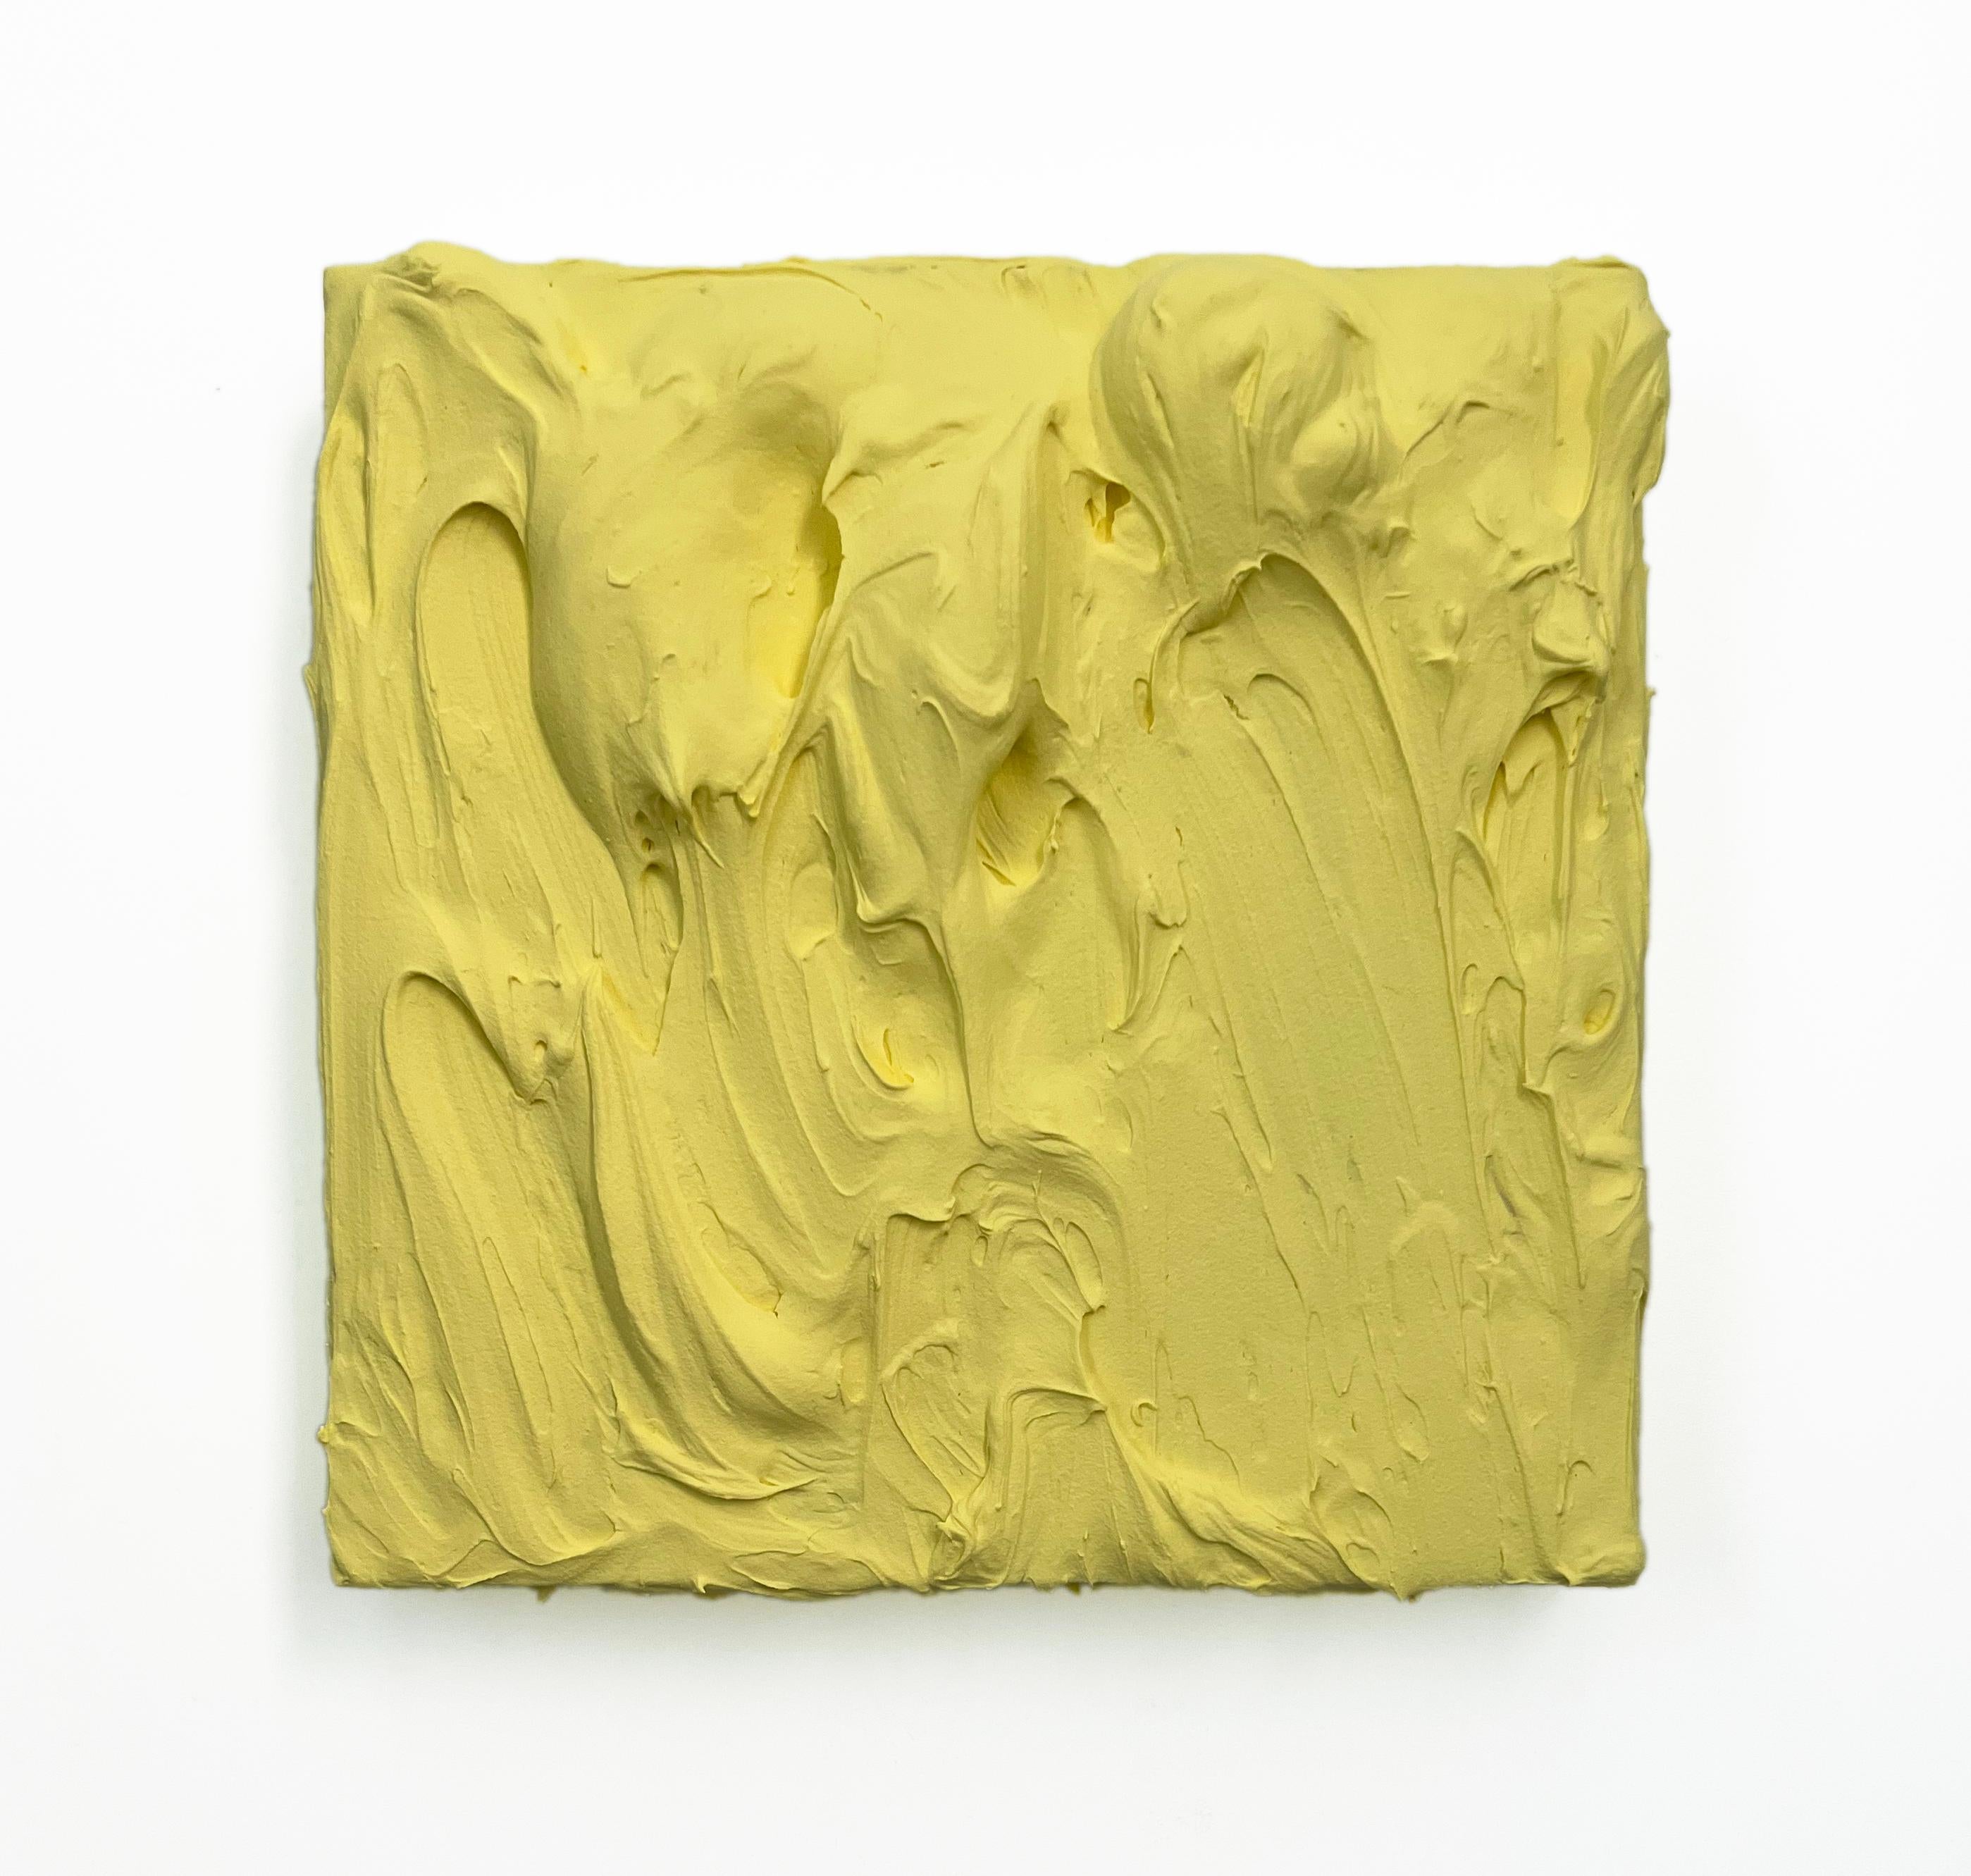 Chloe Hedden Abstract Sculpture - Butter Excess (popcorn impasto thick painting monochrome pop square design)